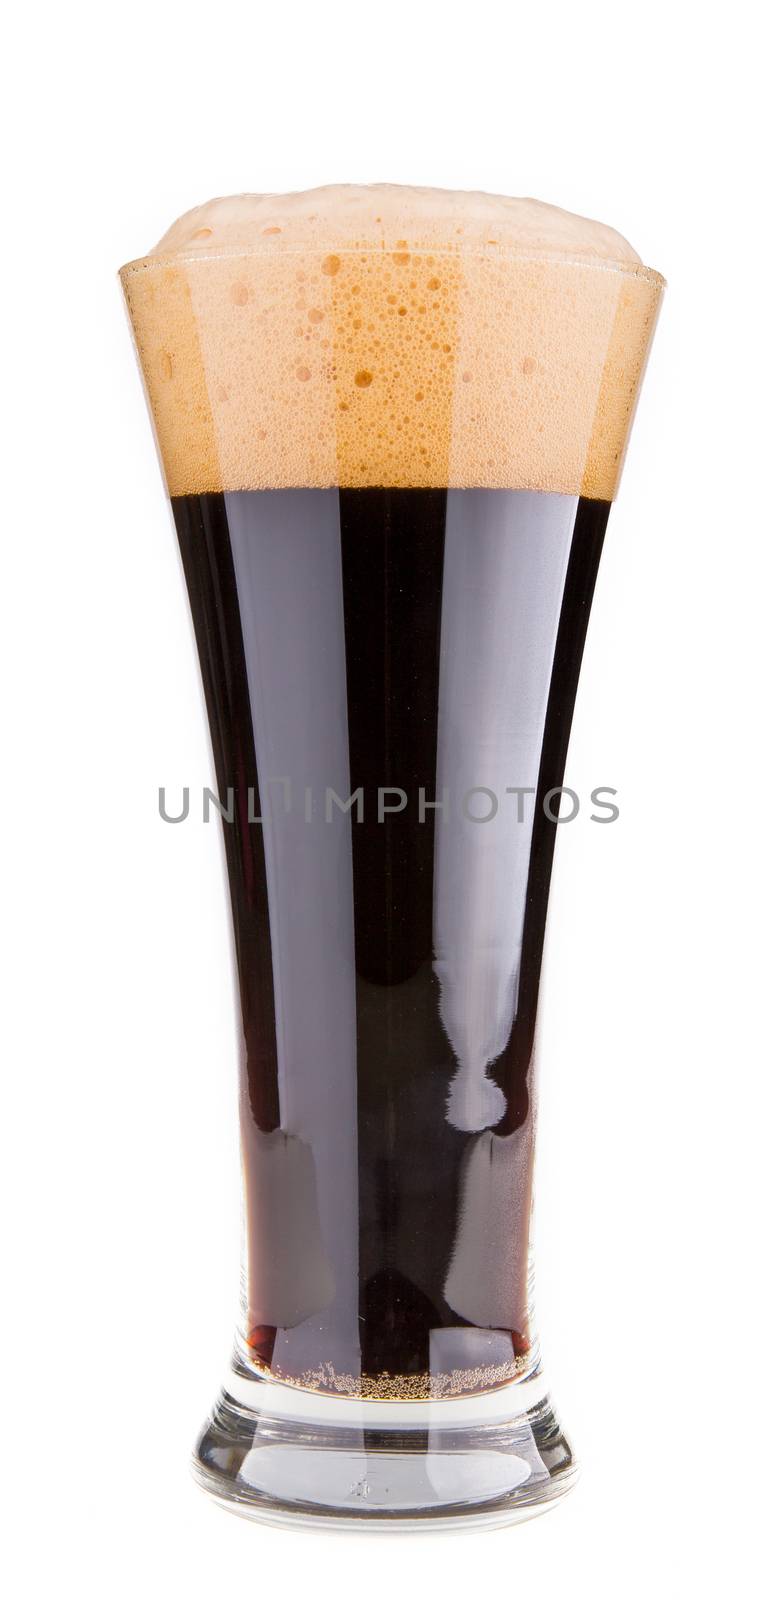 Pints of beer isolated on a white background.